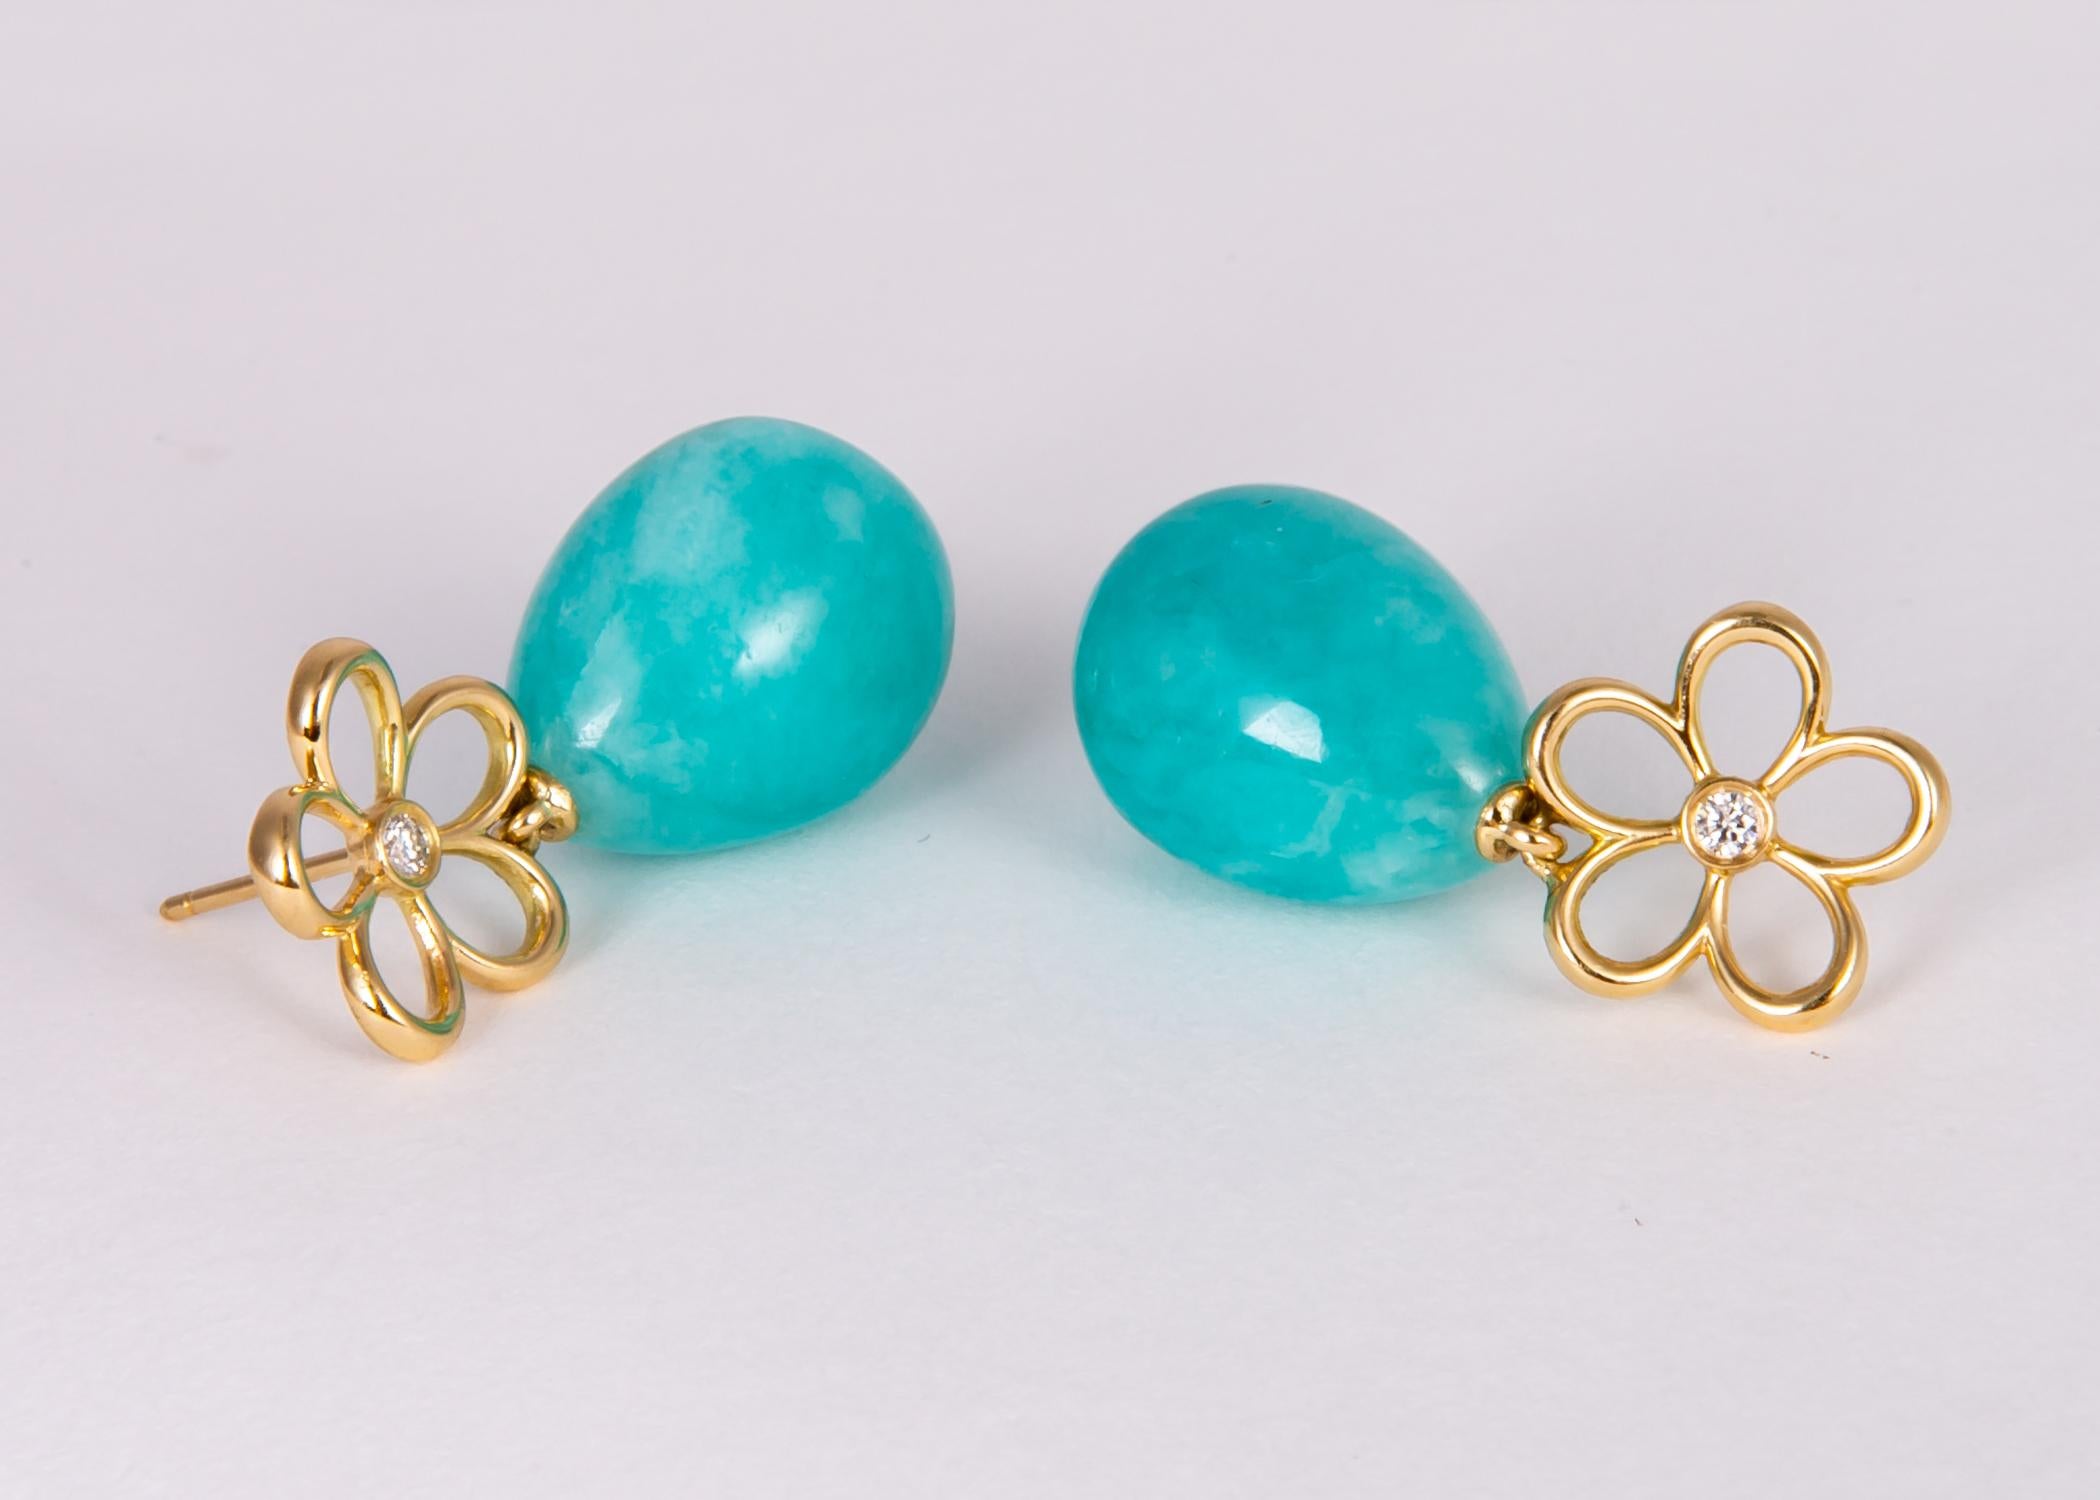 Tiffany & co. uses the simple shape of a daisy adds beautiful amazonite and a diamond to create a simple playful drop earring. 1 1/8 inches in length. 